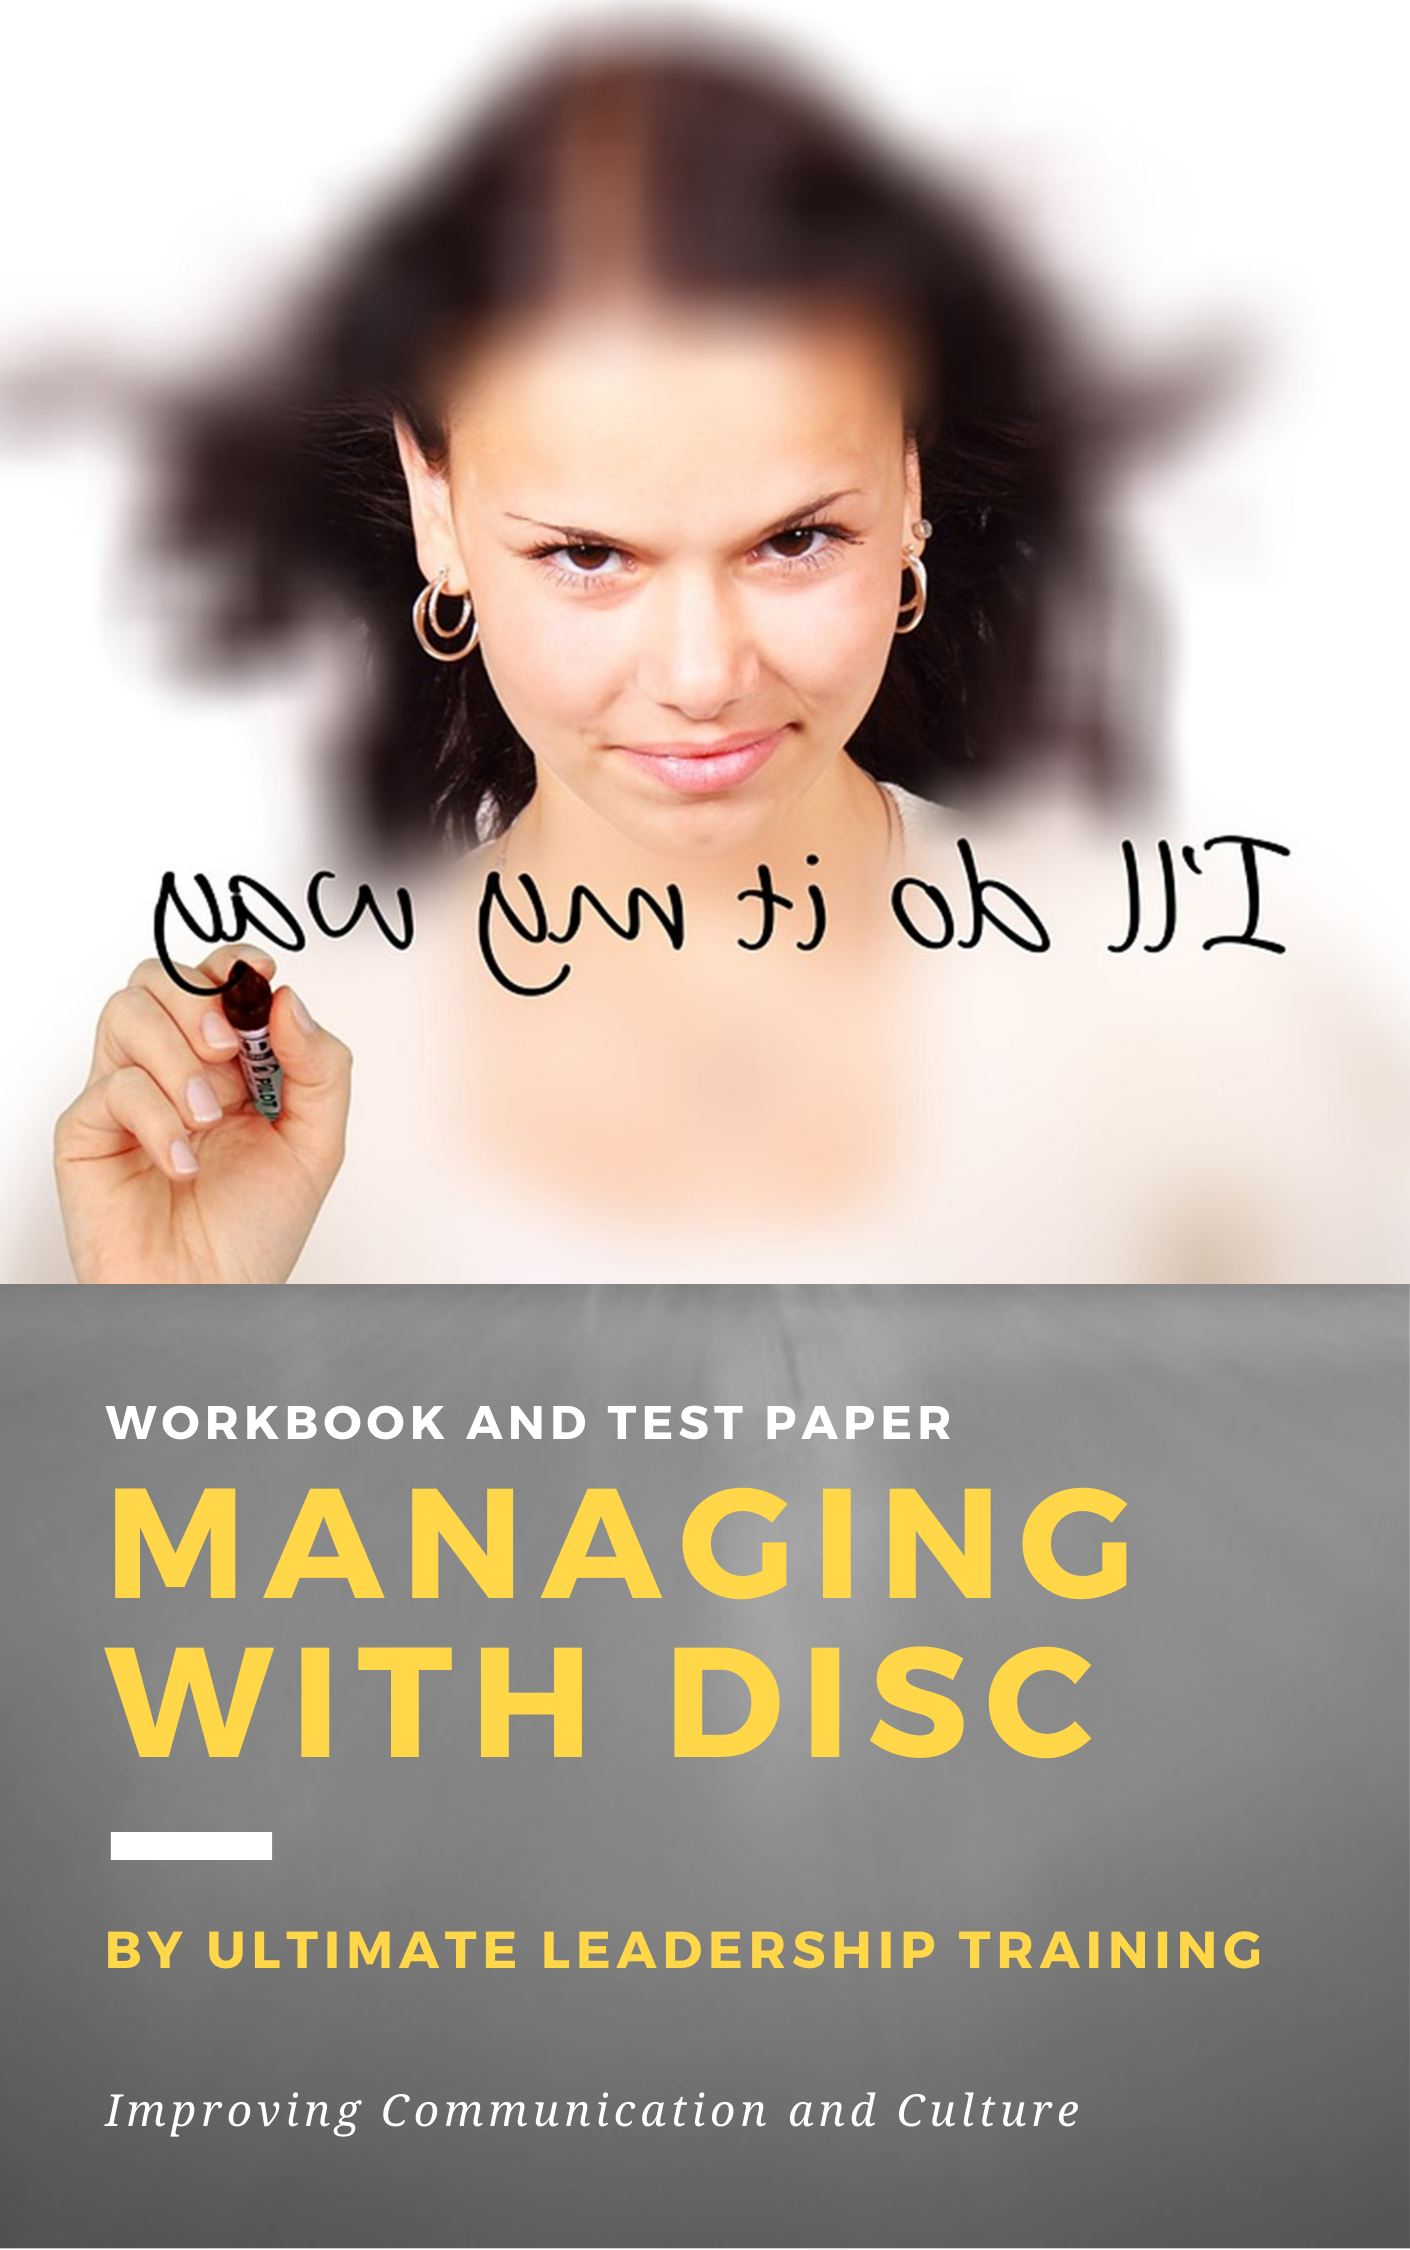 Managing DISC E-Book and Test Paper